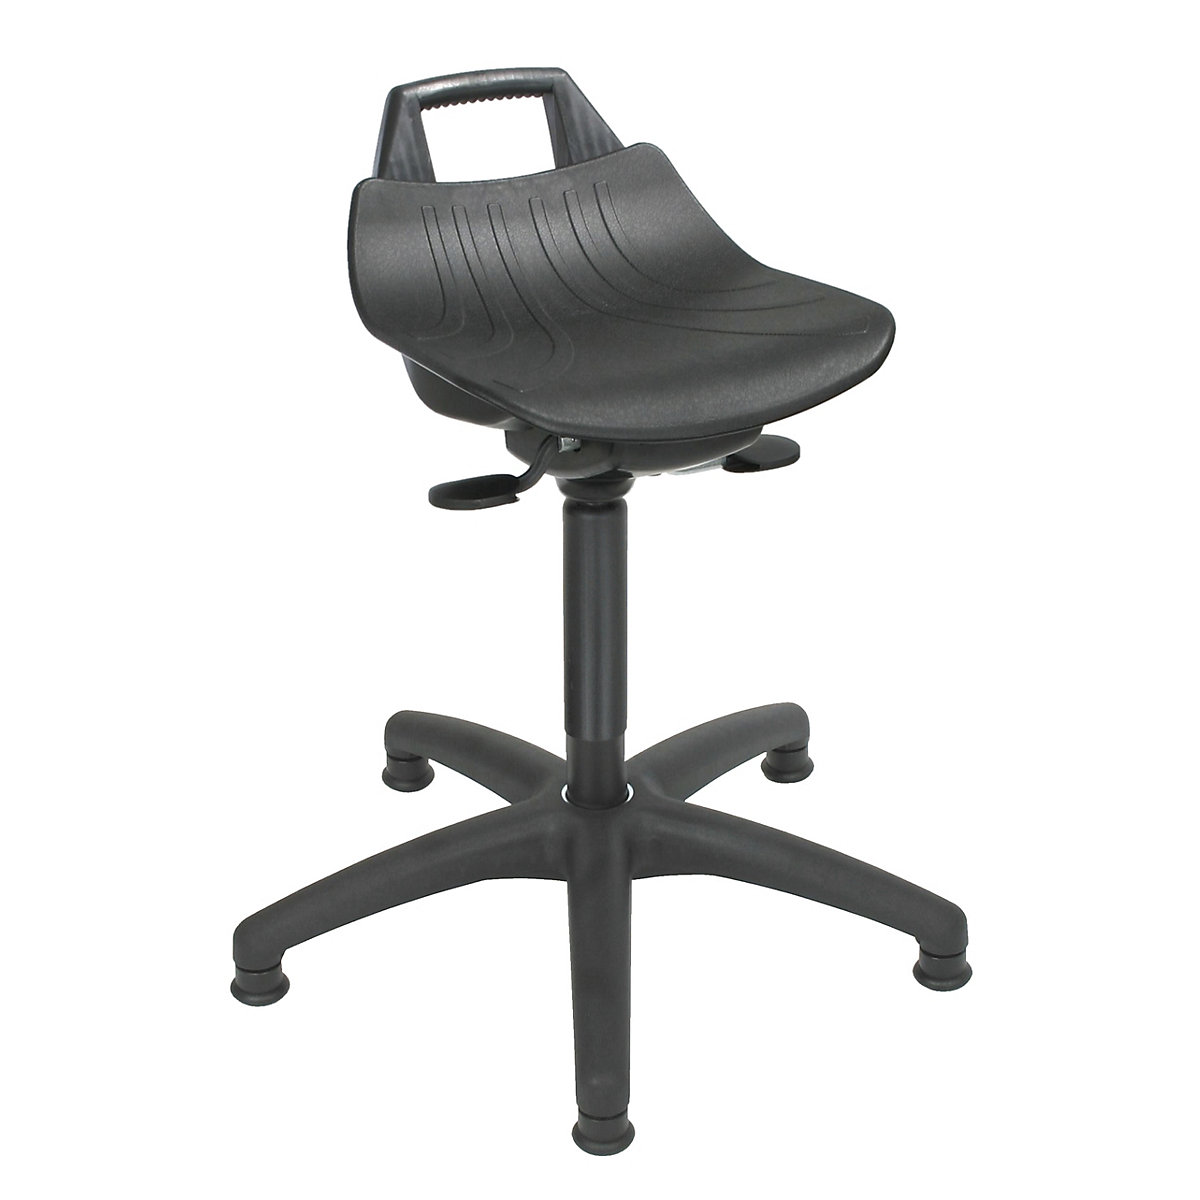 Stool with gas-lift height adjustment